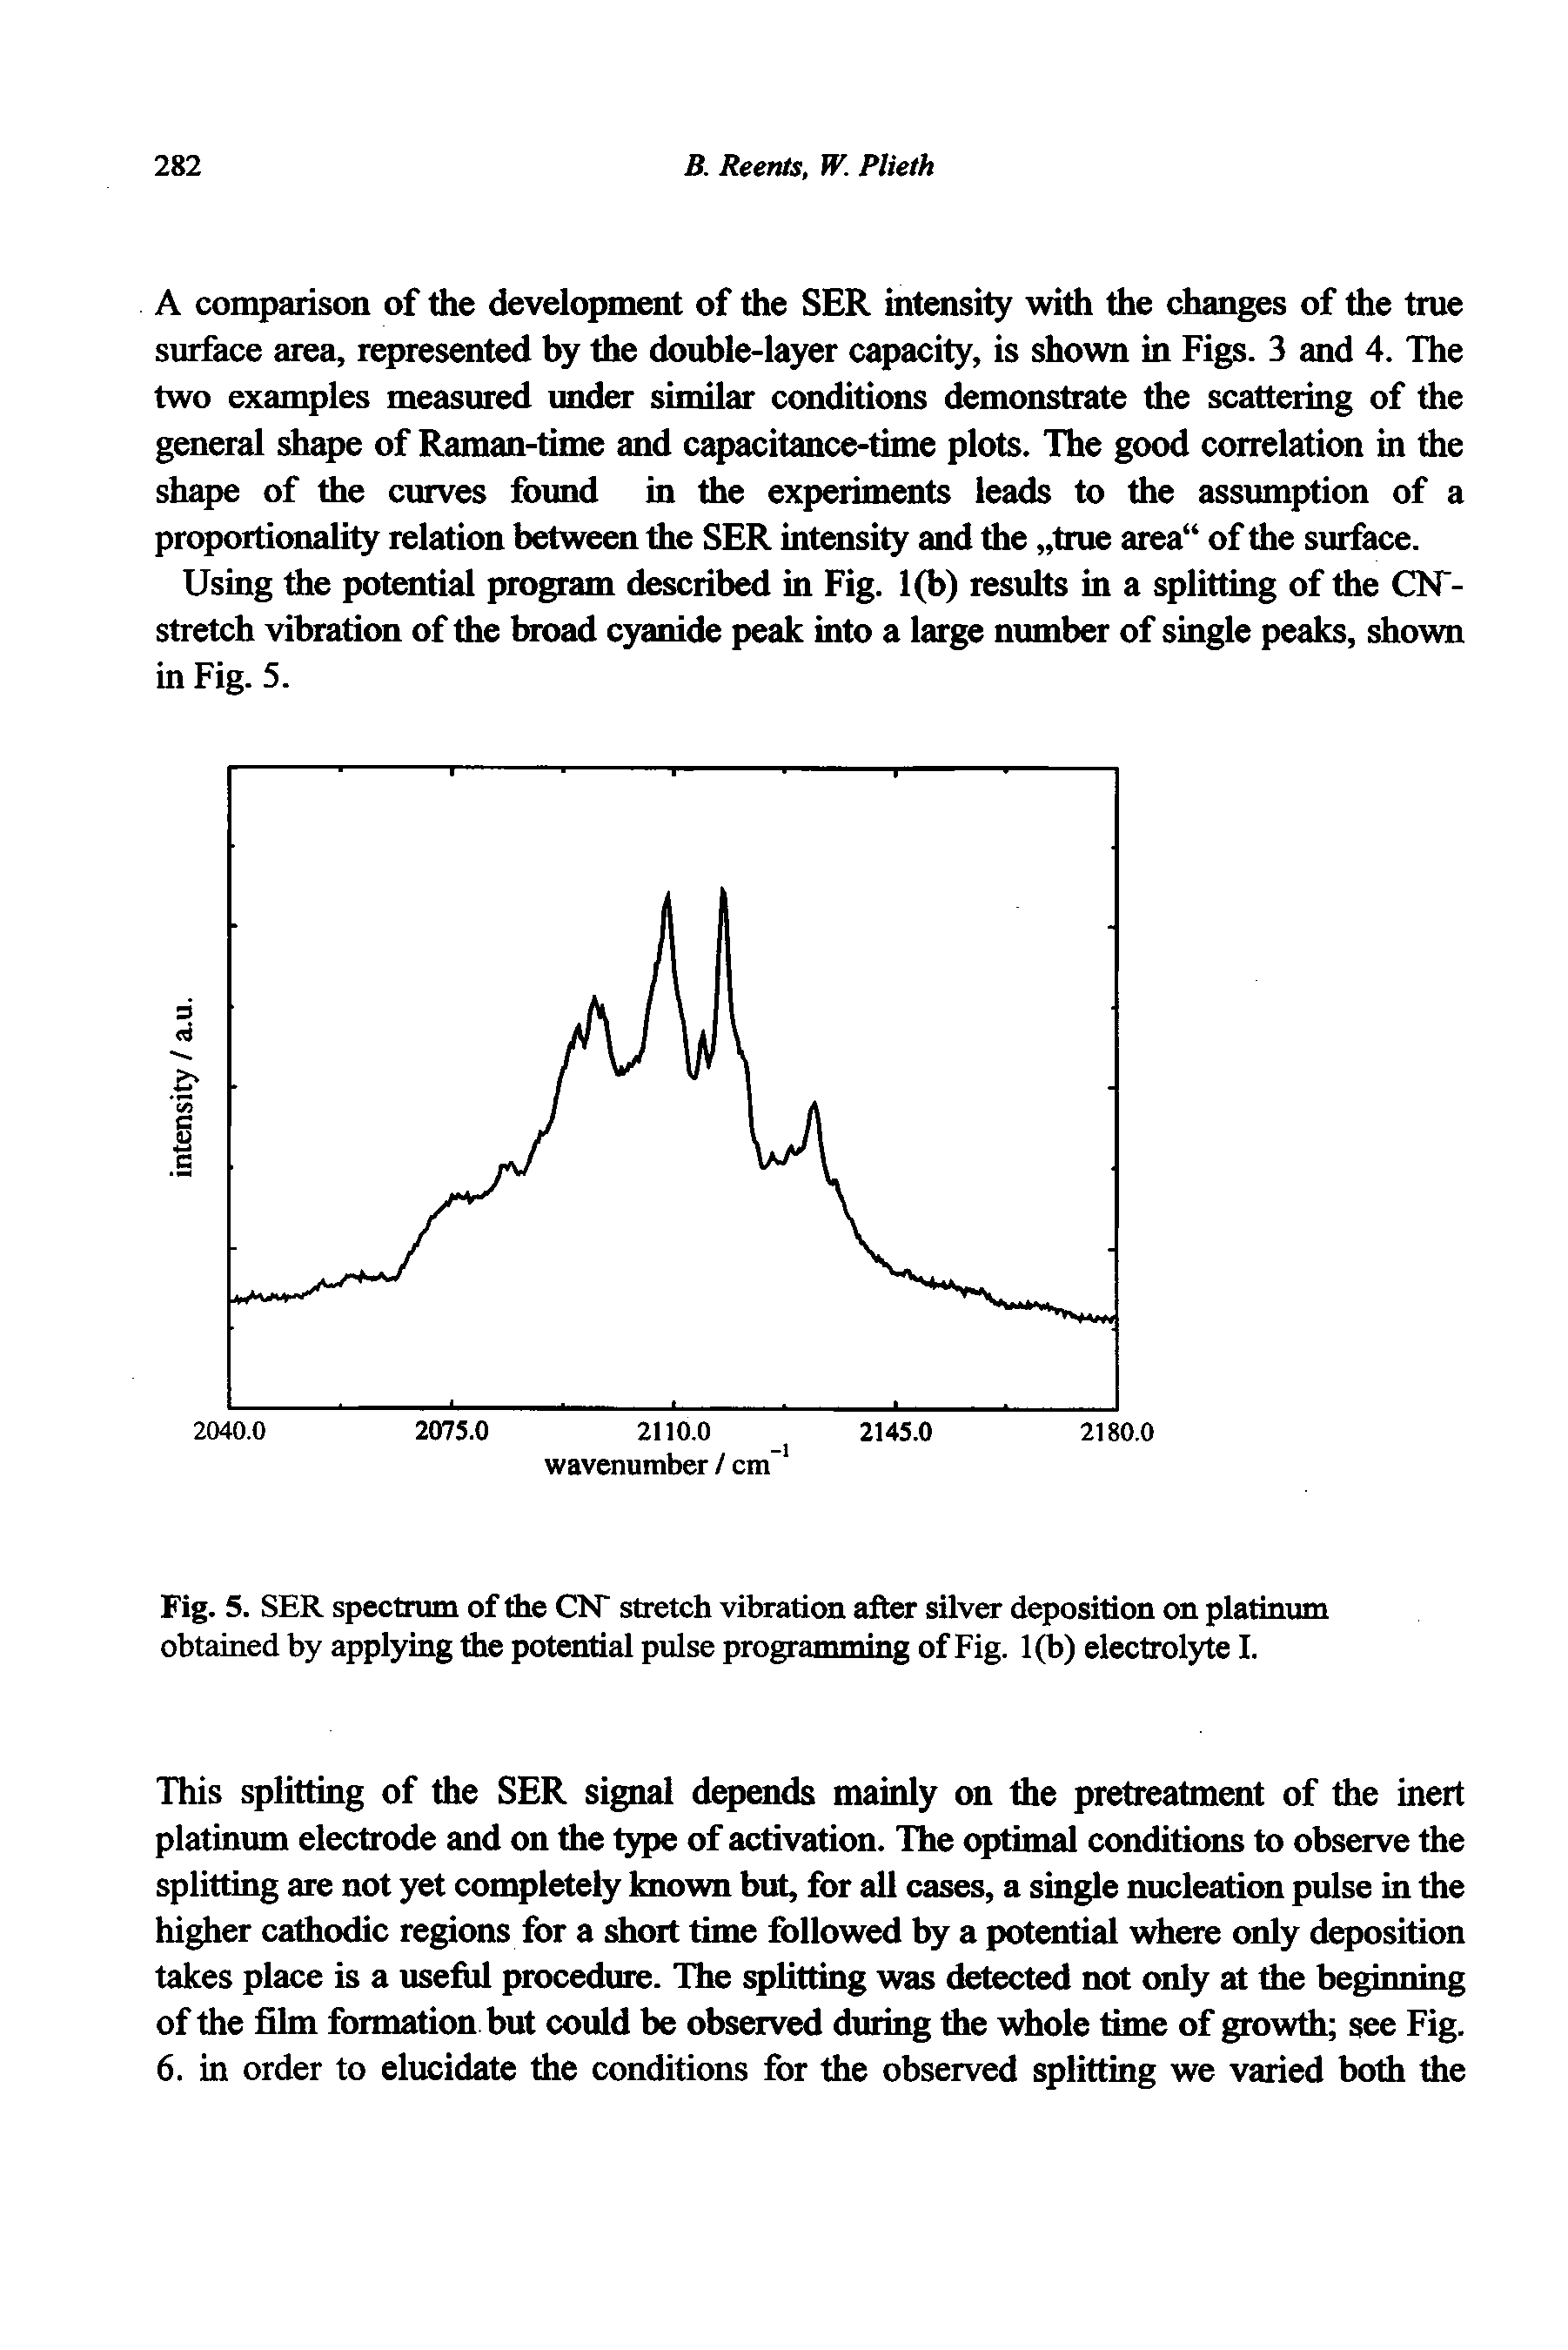 Fig. 5. SER spectrum of the CN" stretch vibration after silver deposition on platinum obtained by applying the potential pulse programming of Fig. 1(b) electrolyte I.